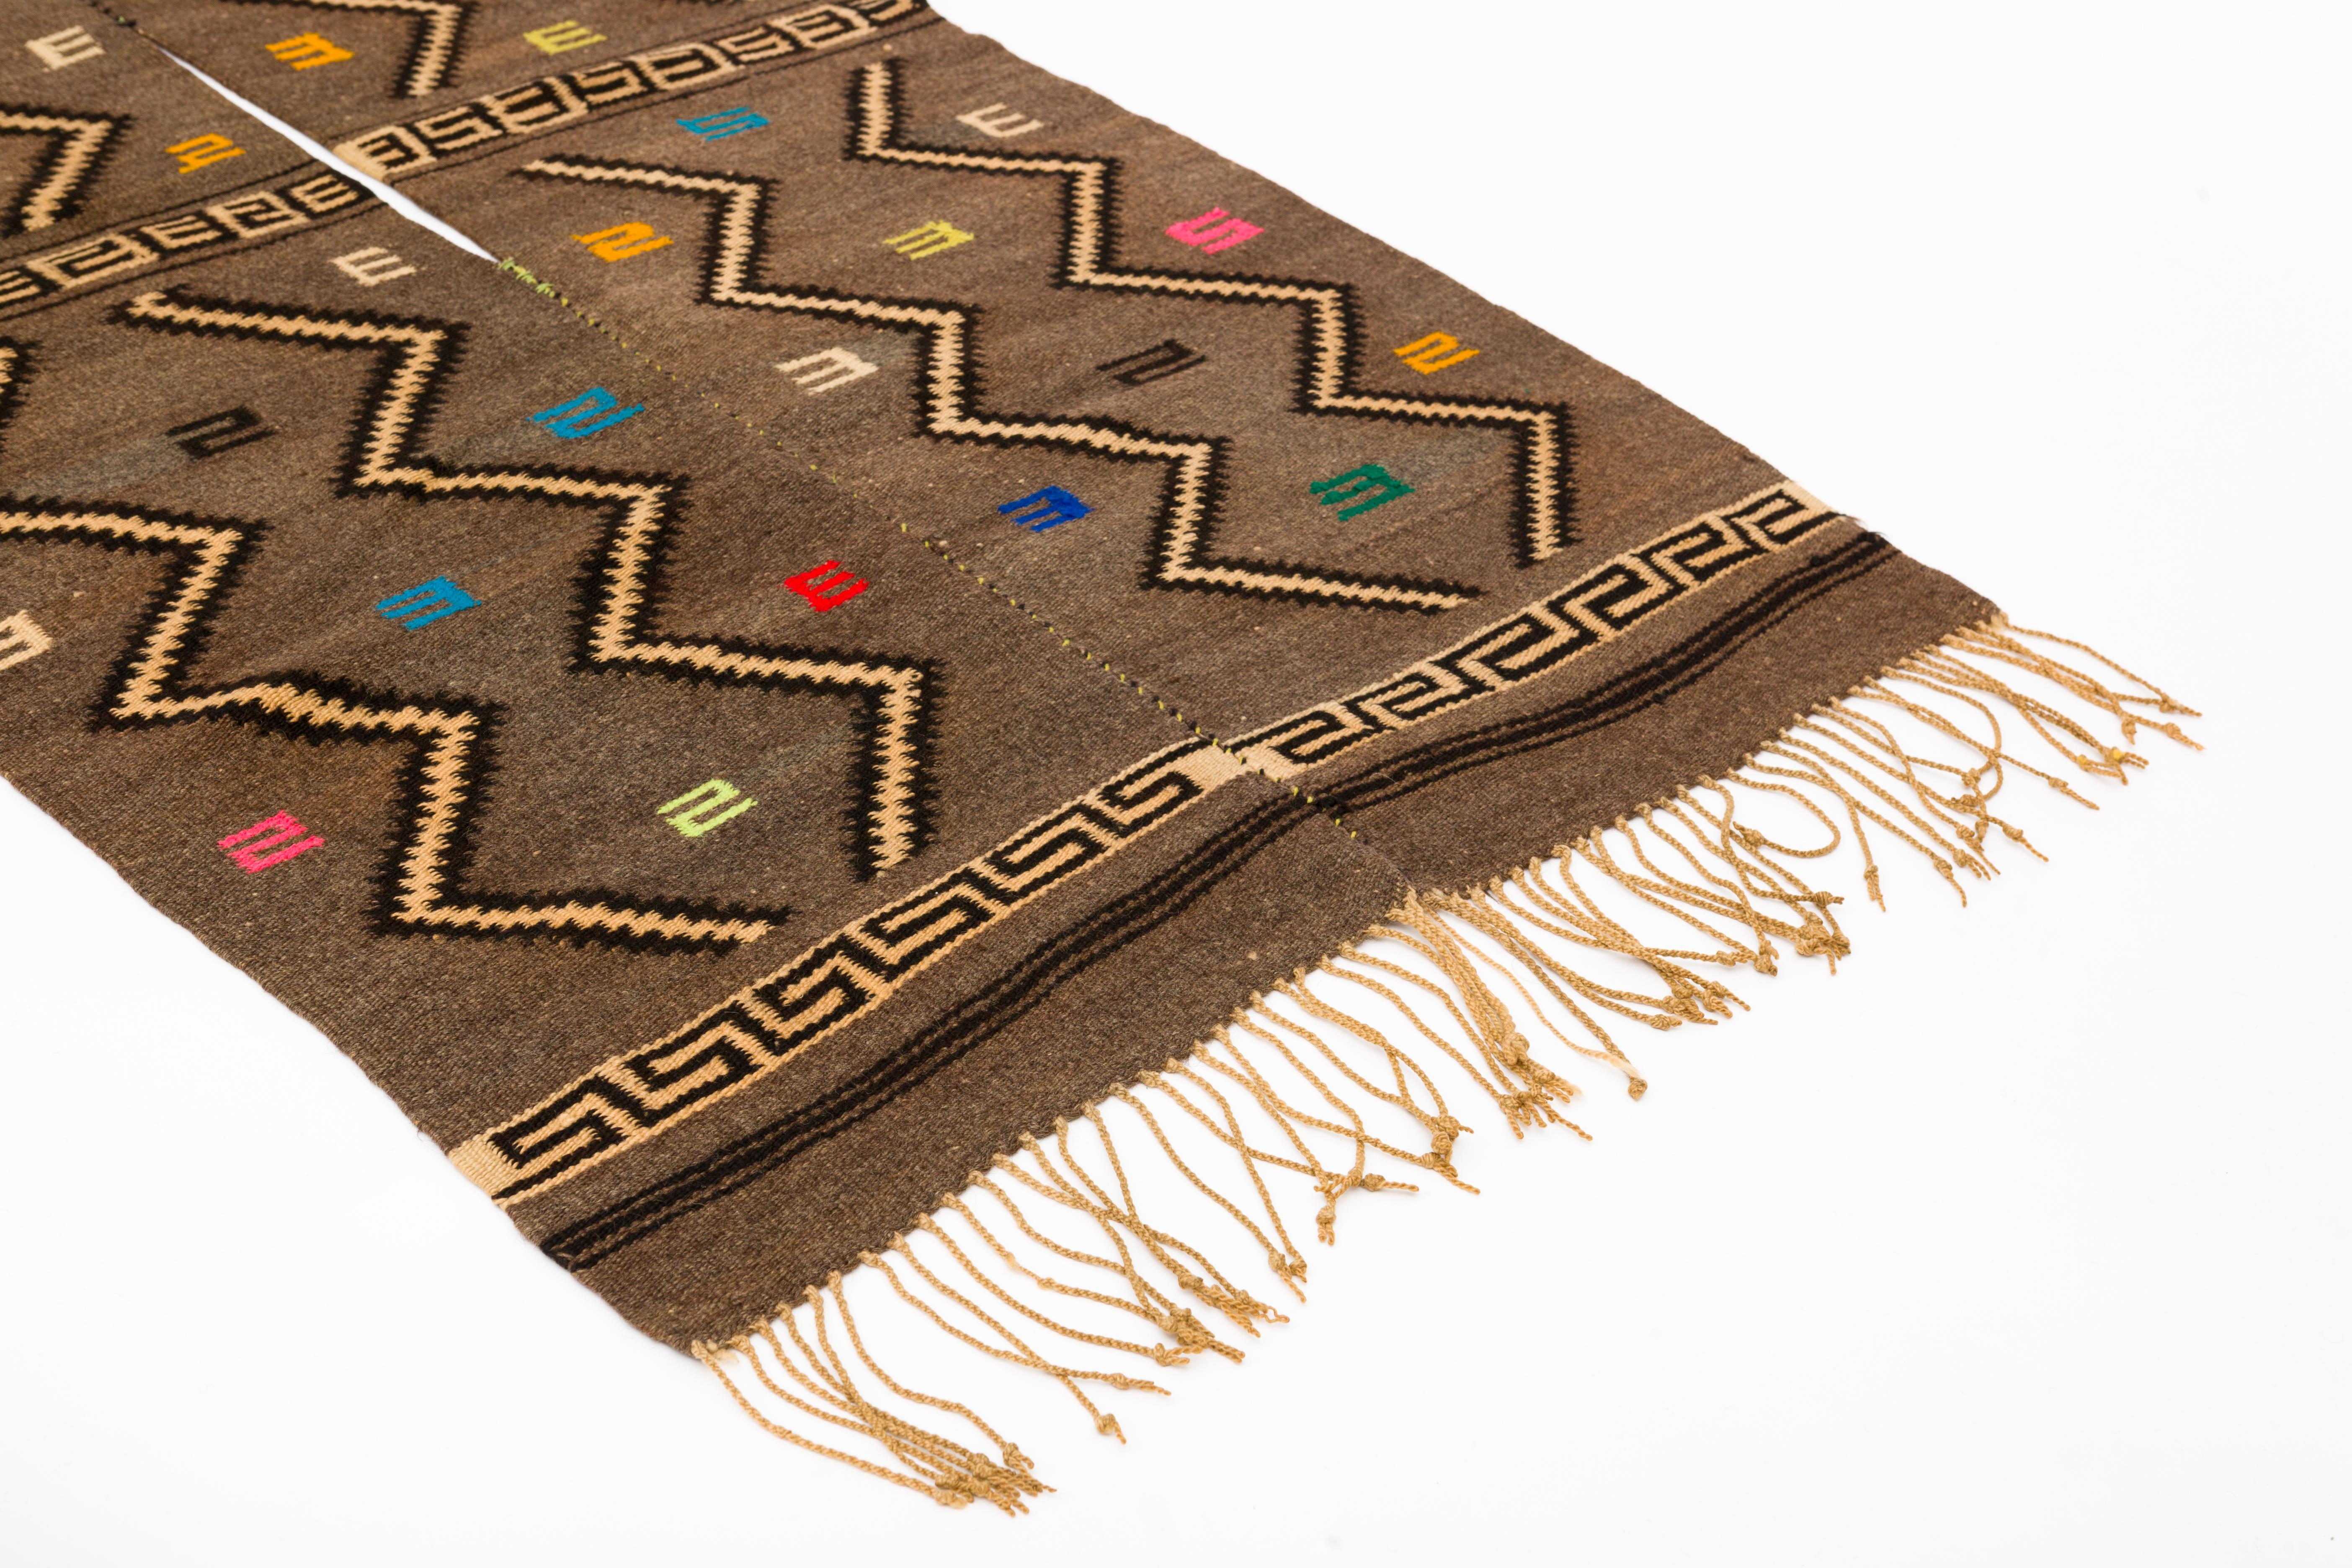 Mixtec wool serape blanket, handwoven with traditional cloud and thunder symbols. Slit opening in middle for wearing. Hand knotted fringe. 
Oaxaca, Mexico, c. 1950's